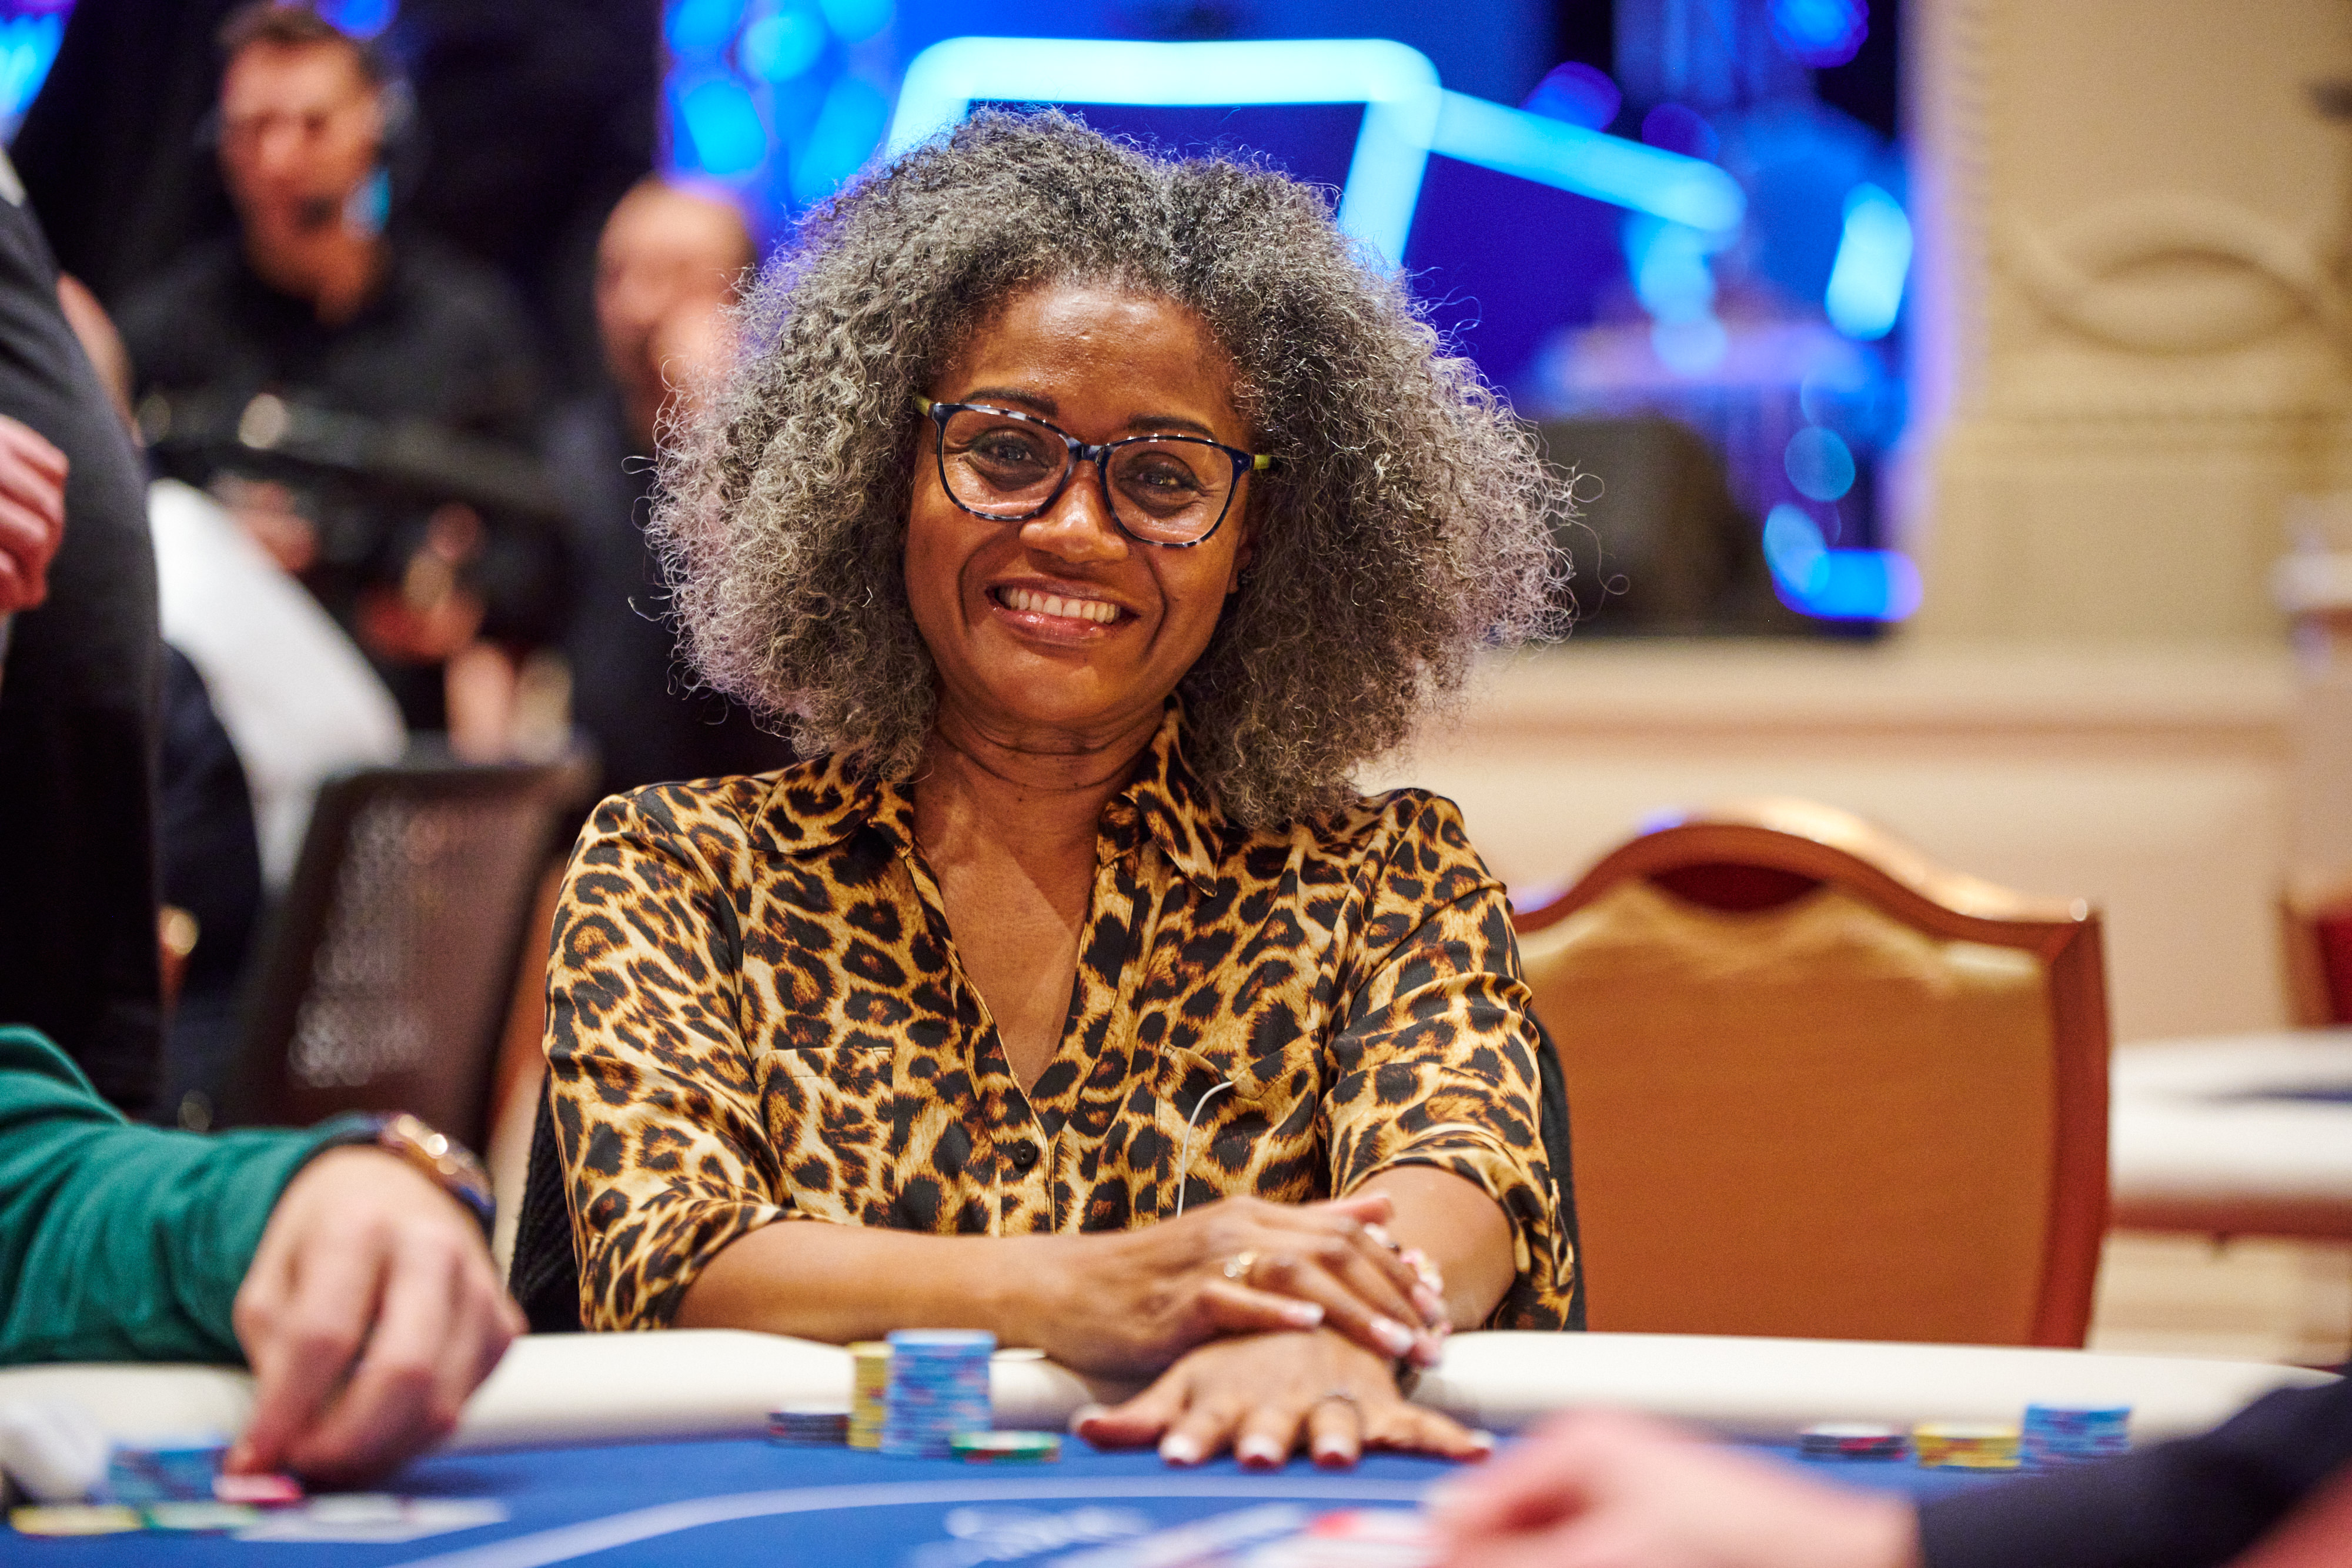 WPT Global Made LoriAnn Persinger’s Dreams Come True